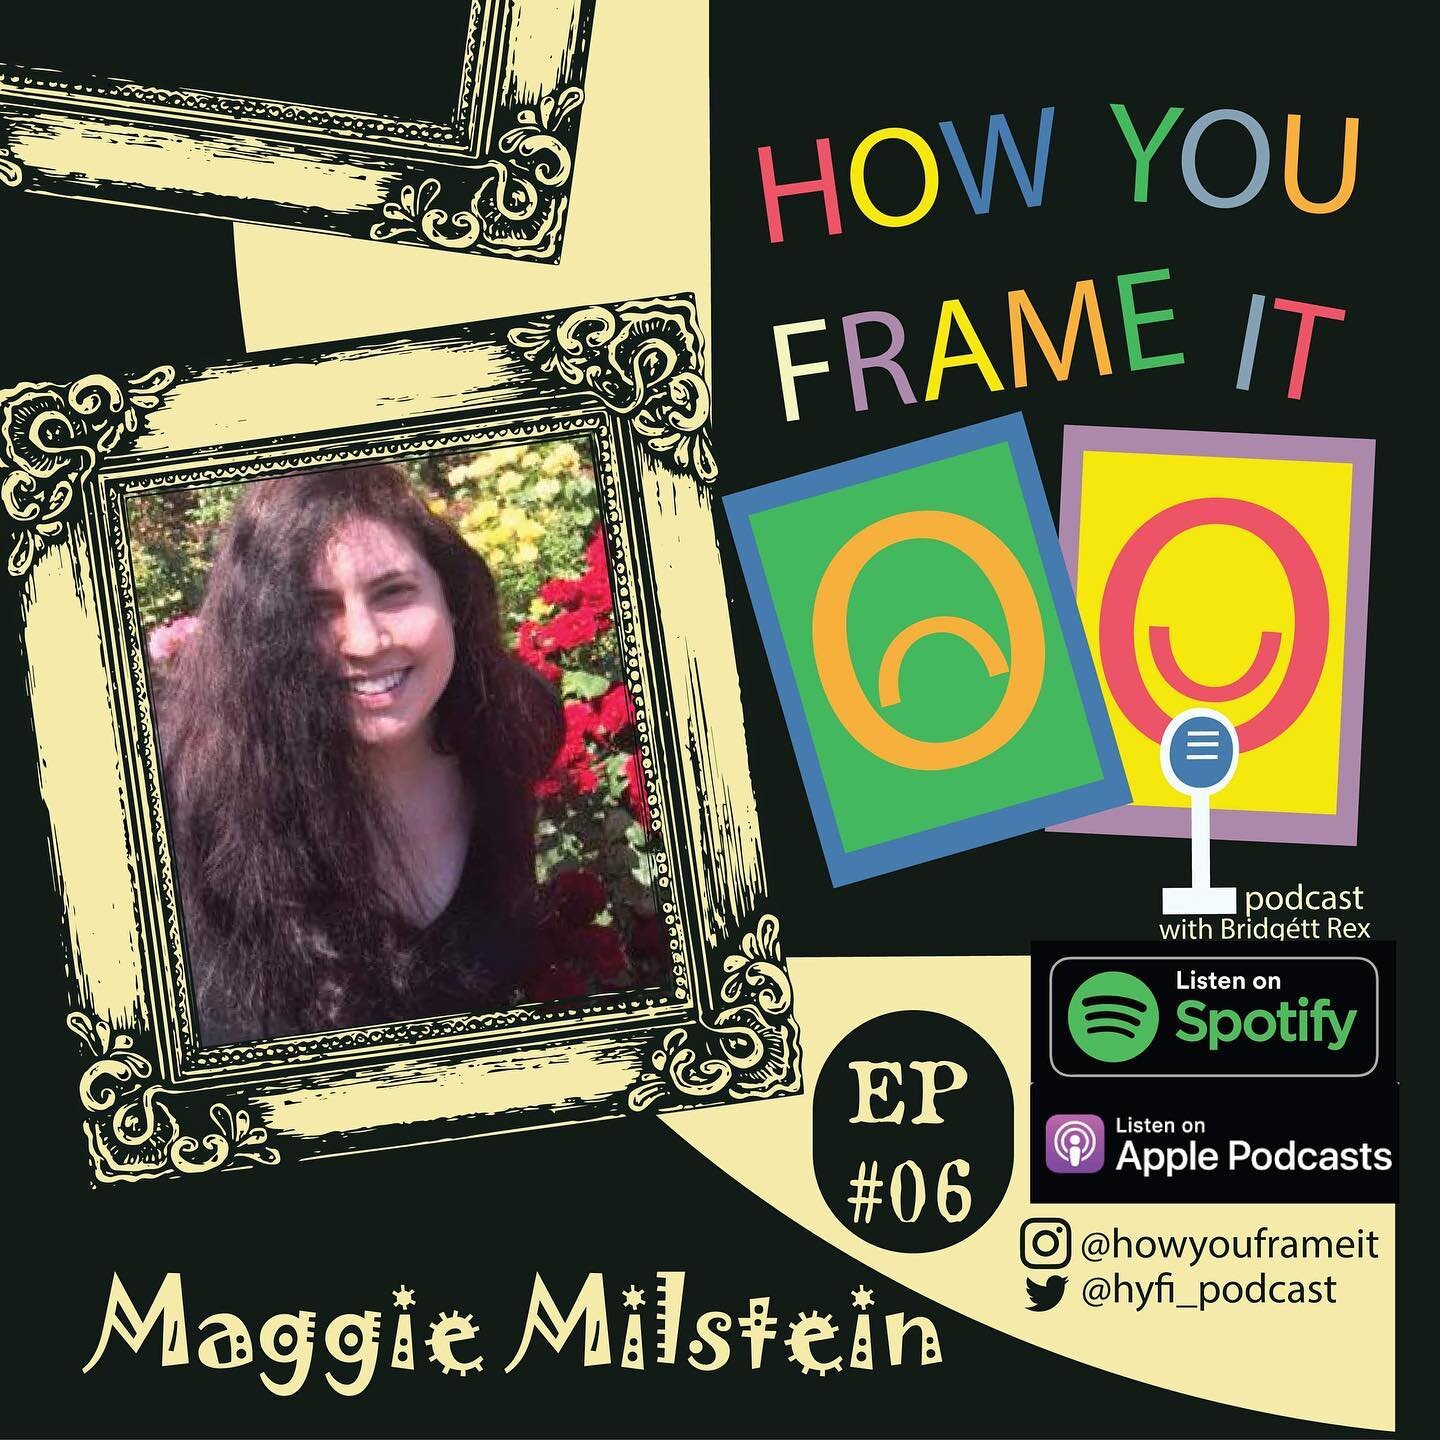 🖼Welcome back to the How You Frame It Podcast! @howyouframeit is a podcast where all art is inclusive, accessible and meaningful no matter how you frame it. 

🪑On this episode, Bridgett sits down with author Maggie Milstein where she talks to us ab